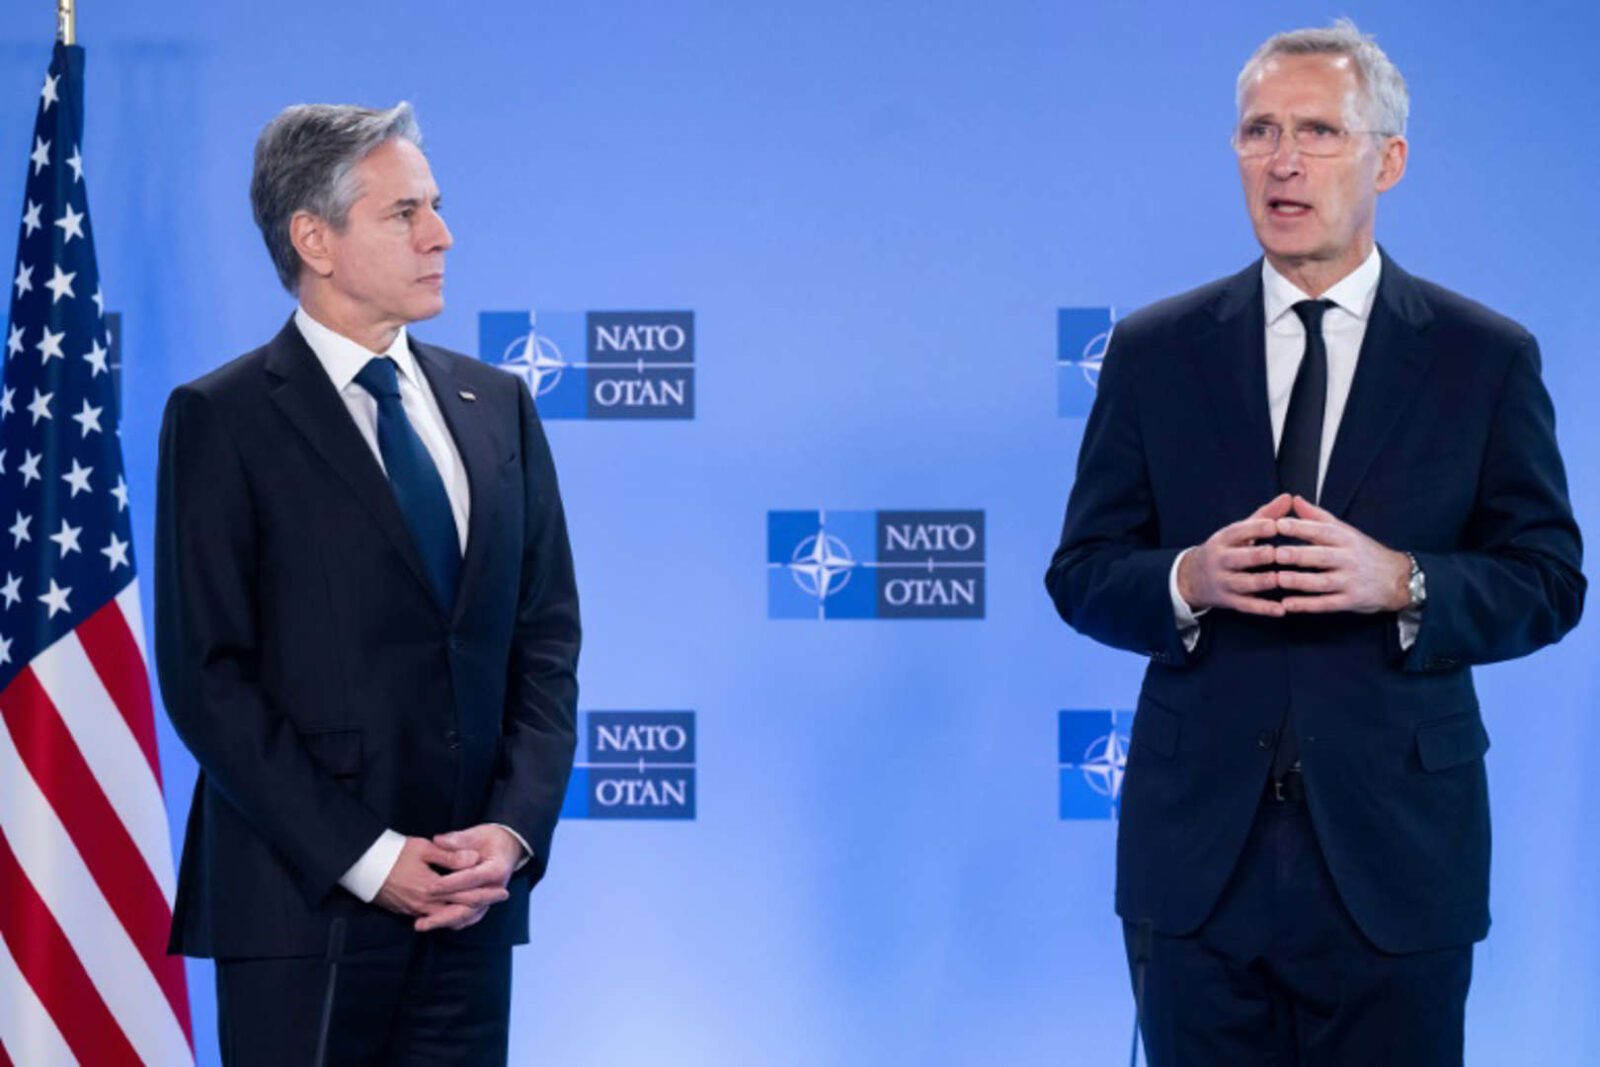 NATO pledges to maintain military support for Ukraine